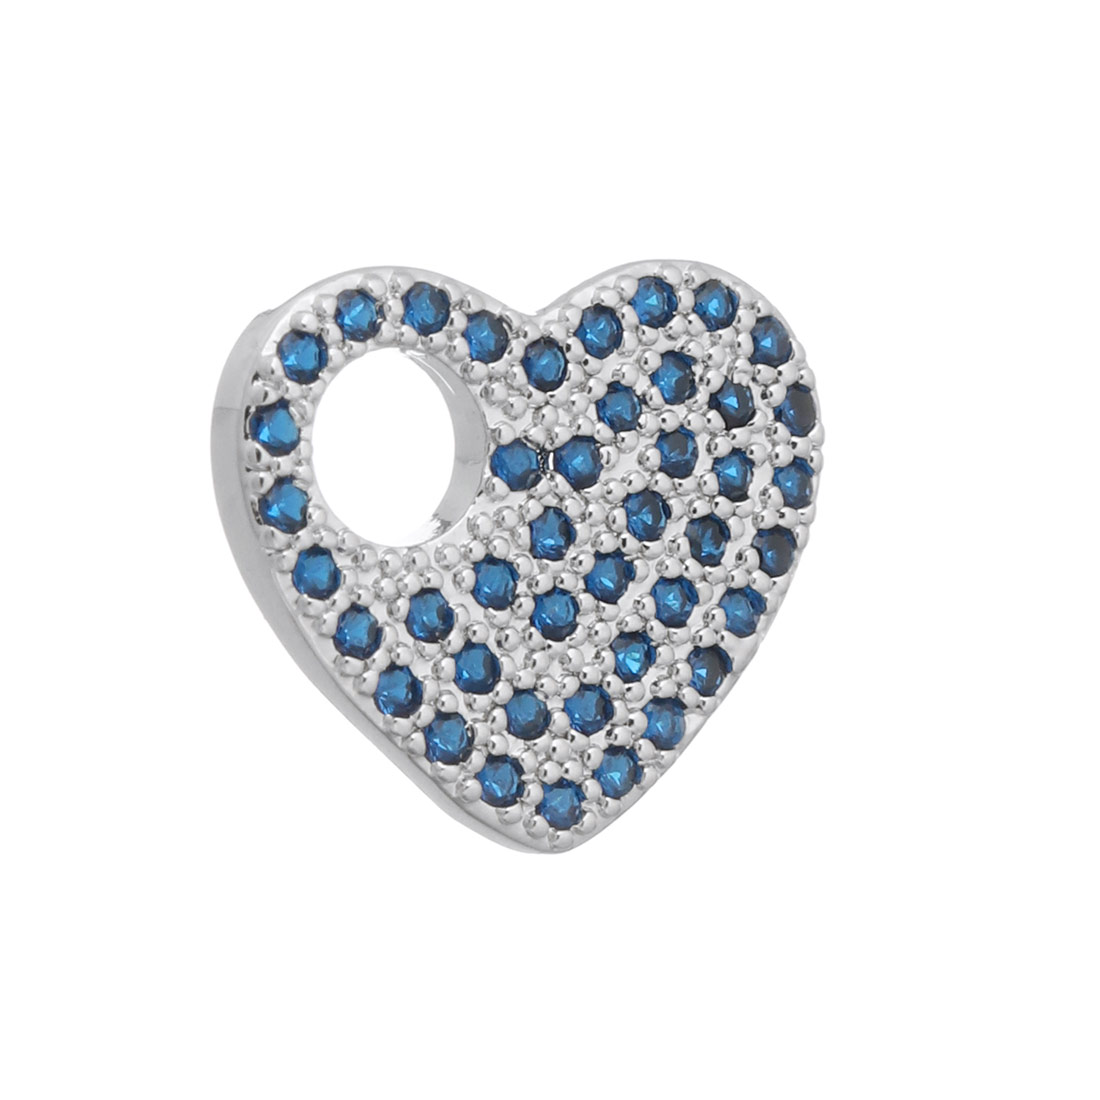 4:platinum plated with blue CZ